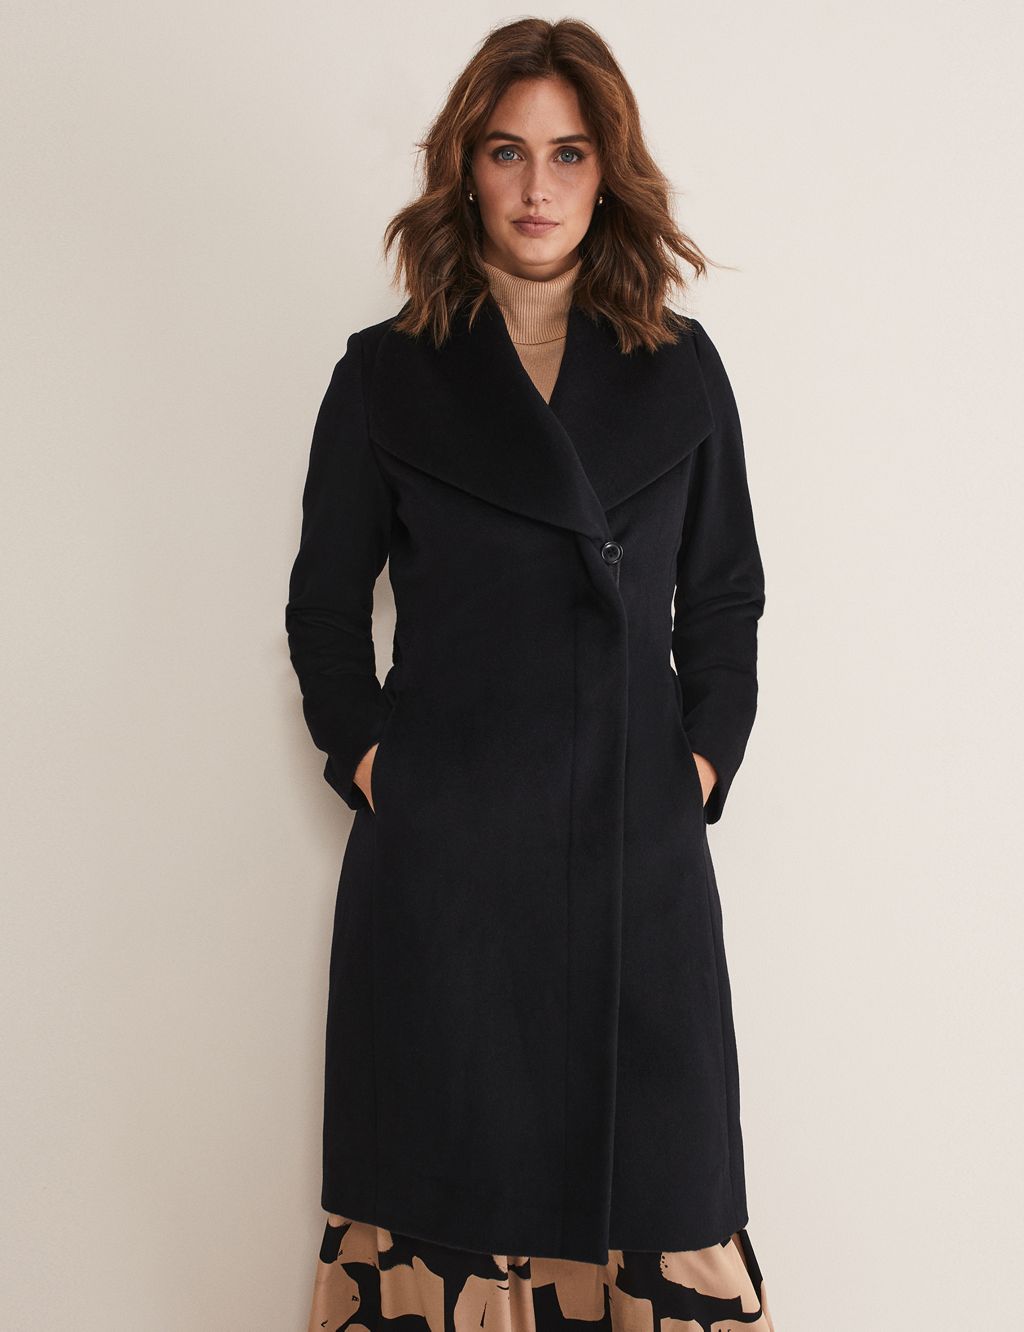 Wool Rich Collared Wrap Coat image 1